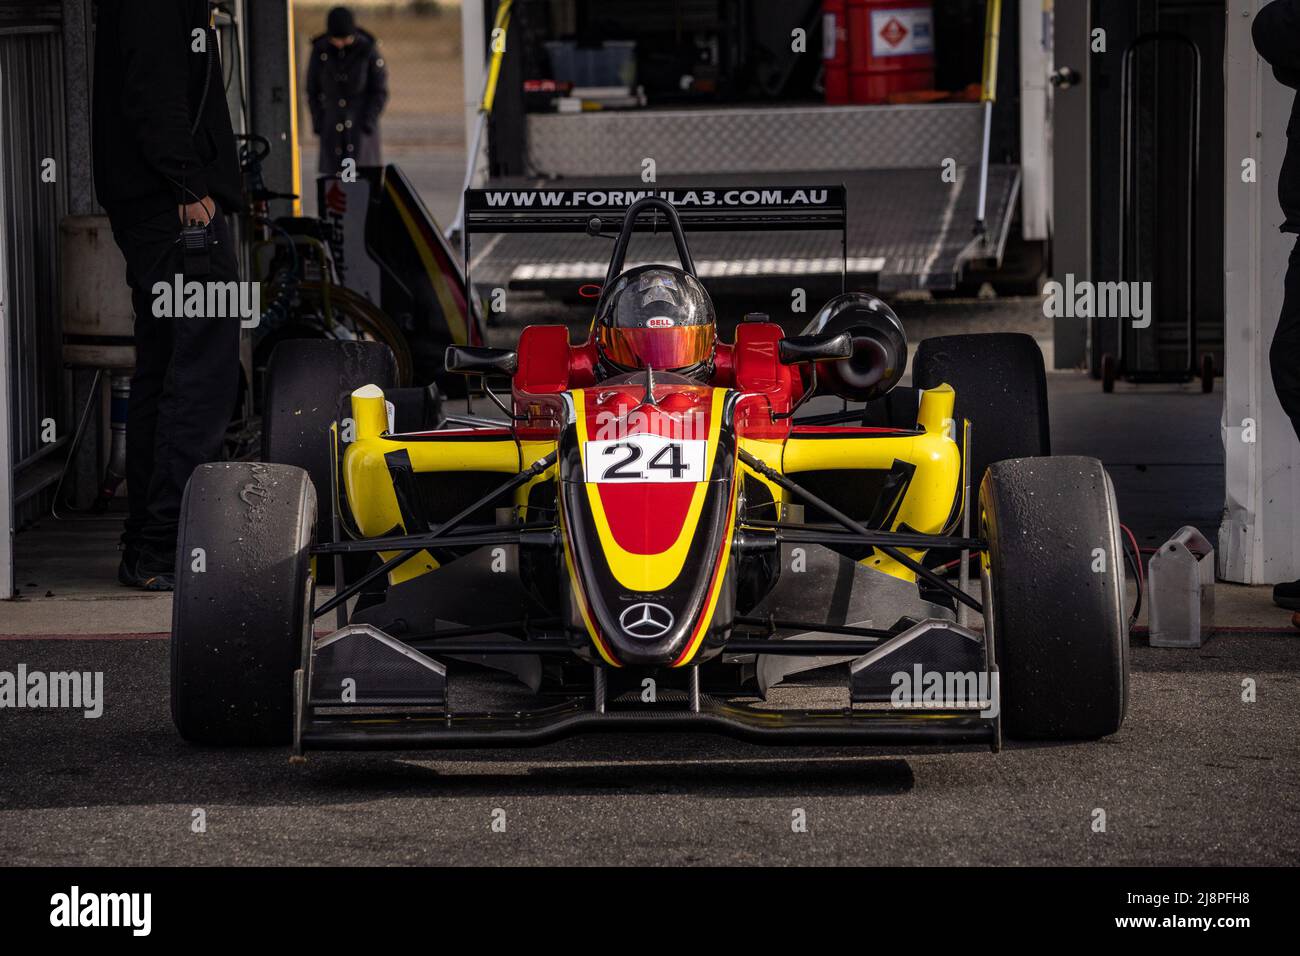 The yellow and red number 24 Australia Formula 3 car sitting in the pitlane just prior to heading out for testing at Winton Motor Raceway. Stock Photo